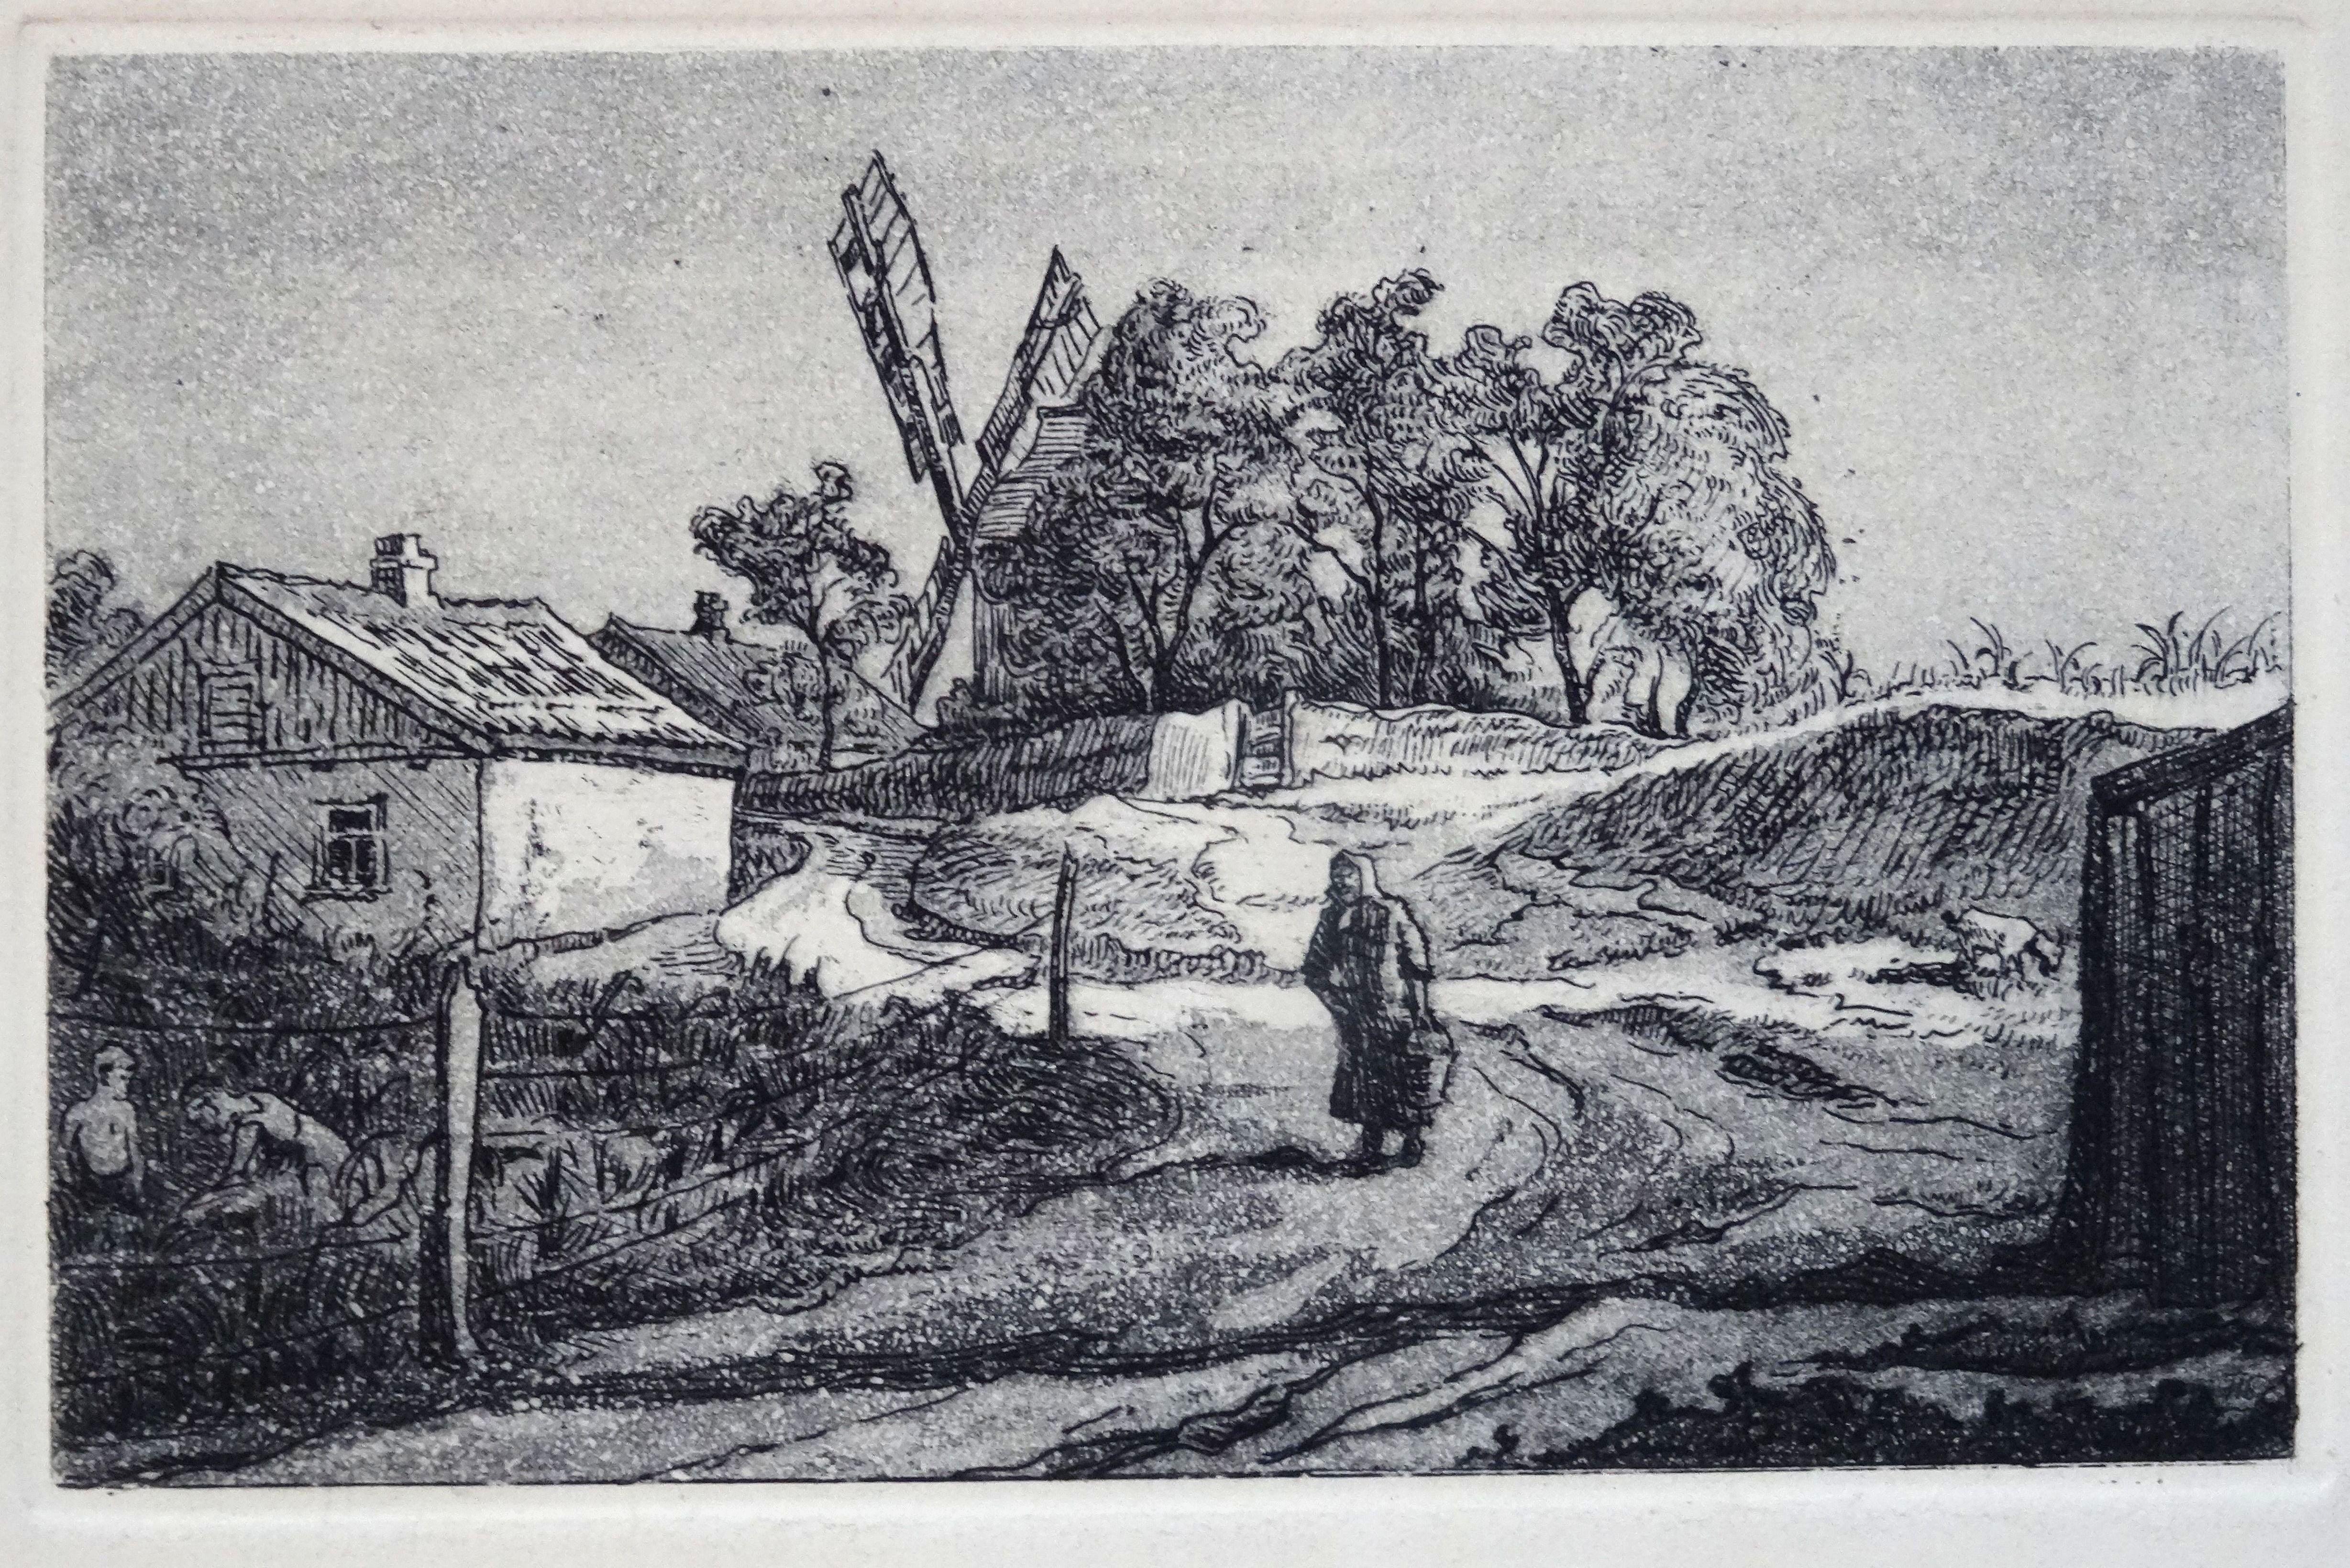 Piotr Petrovich Belousov Landscape Print - The Road From the Mill, paper, etching, 10x14.5 cm